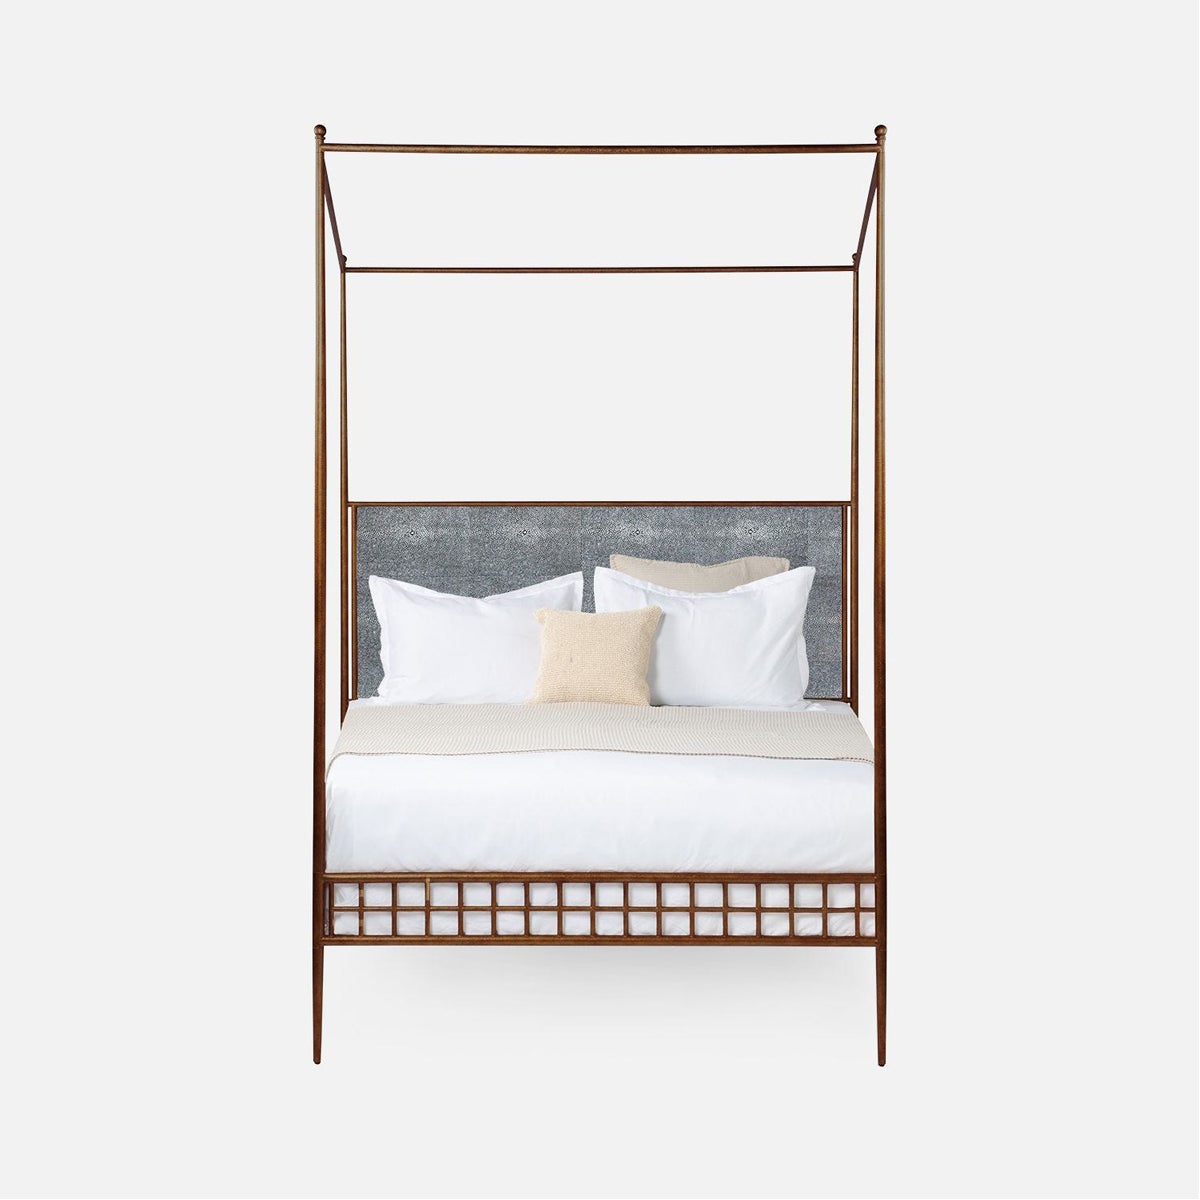 Made Goods Hamilton Textured Iron Canopy Bed in Brenta Cotton/Jute